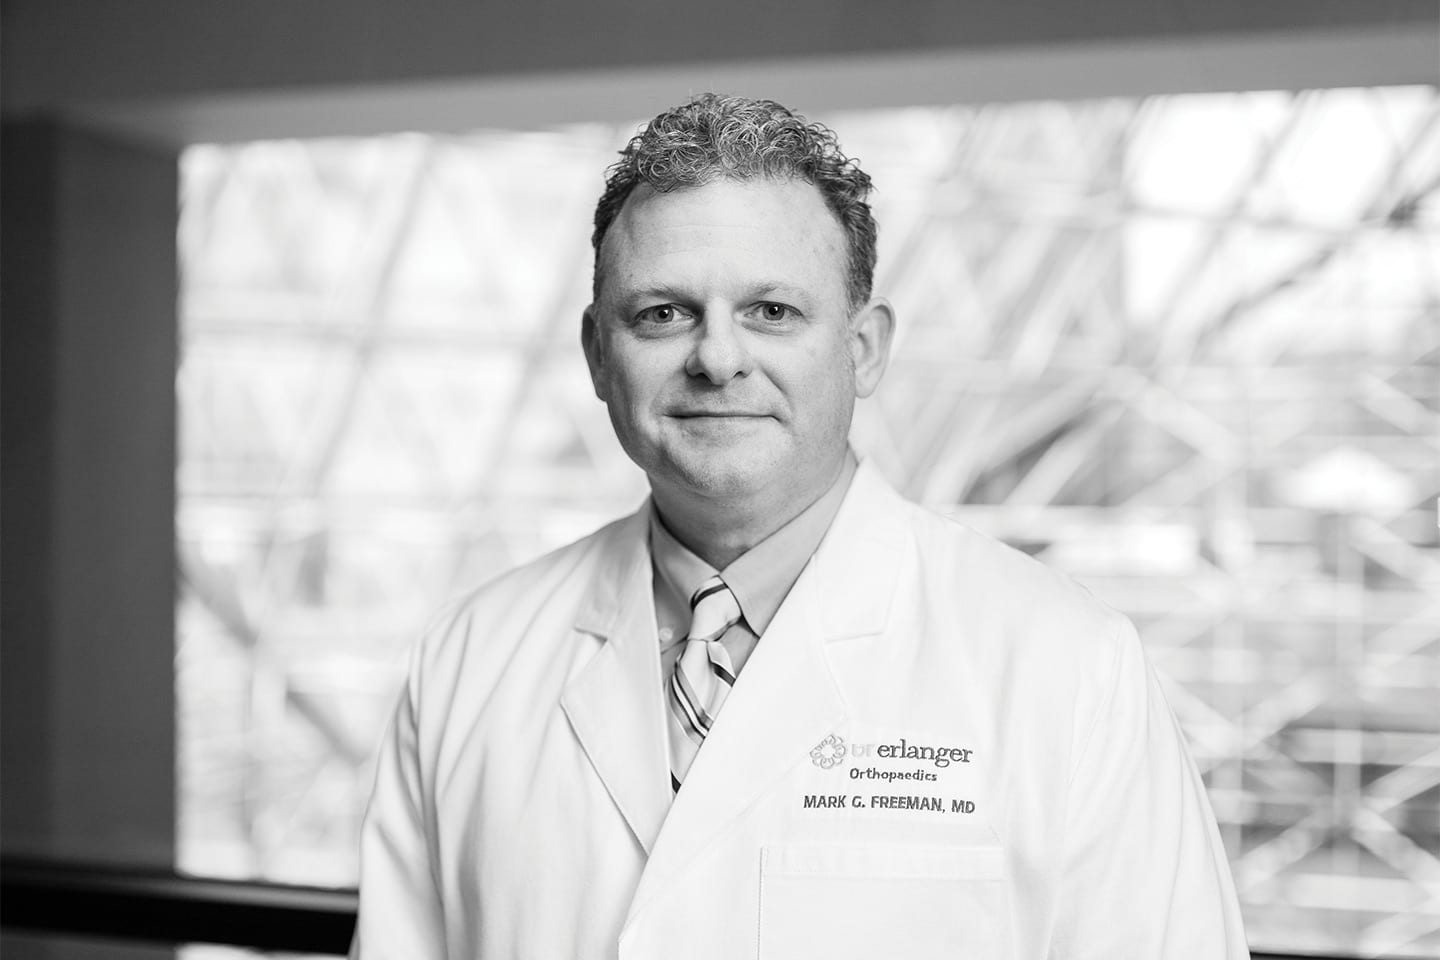 Dr. Mark G Freeman at Erlanger Orthopaedic Institute in chattanooga